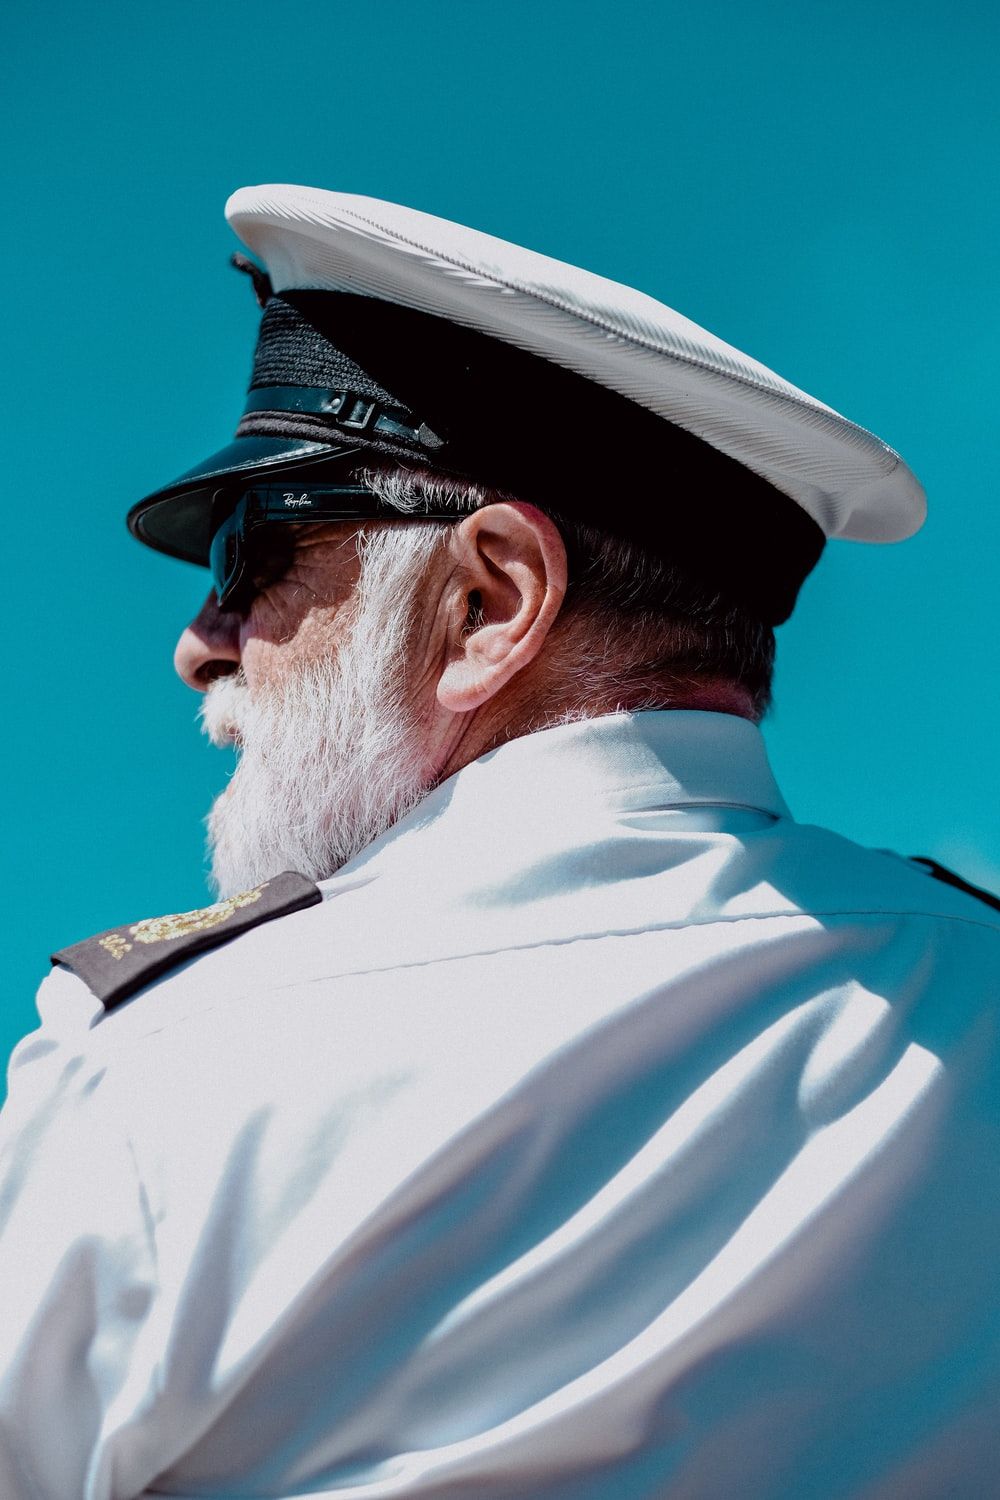 Navy Uniform Picture. Download Free Image